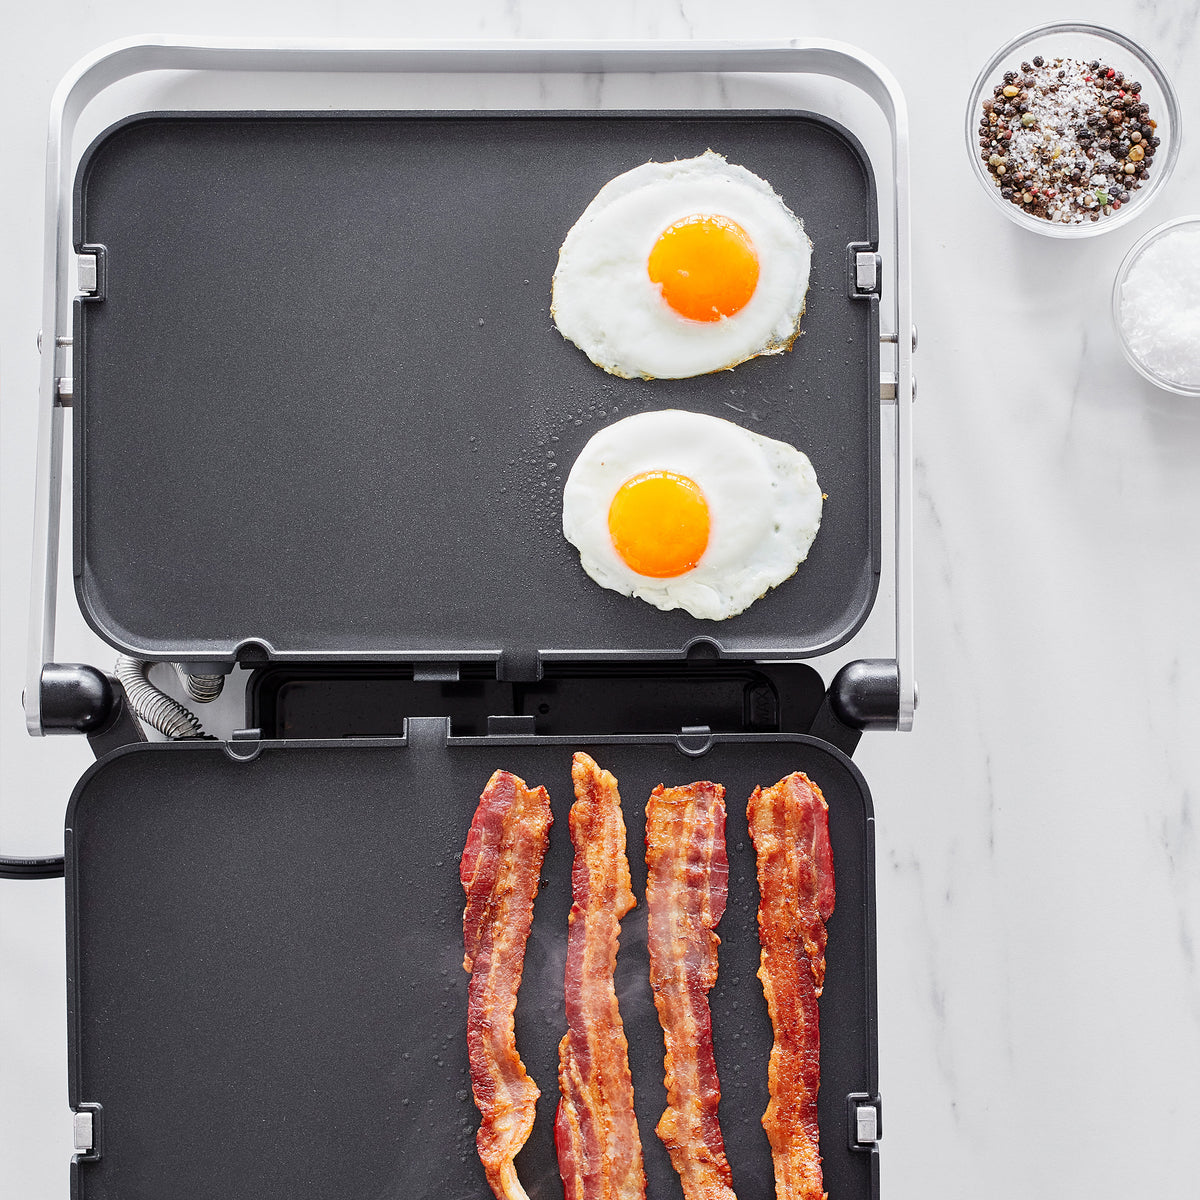 Ceramic Nonstick 3-in-1 Grill, Griddle & Waffle Maker